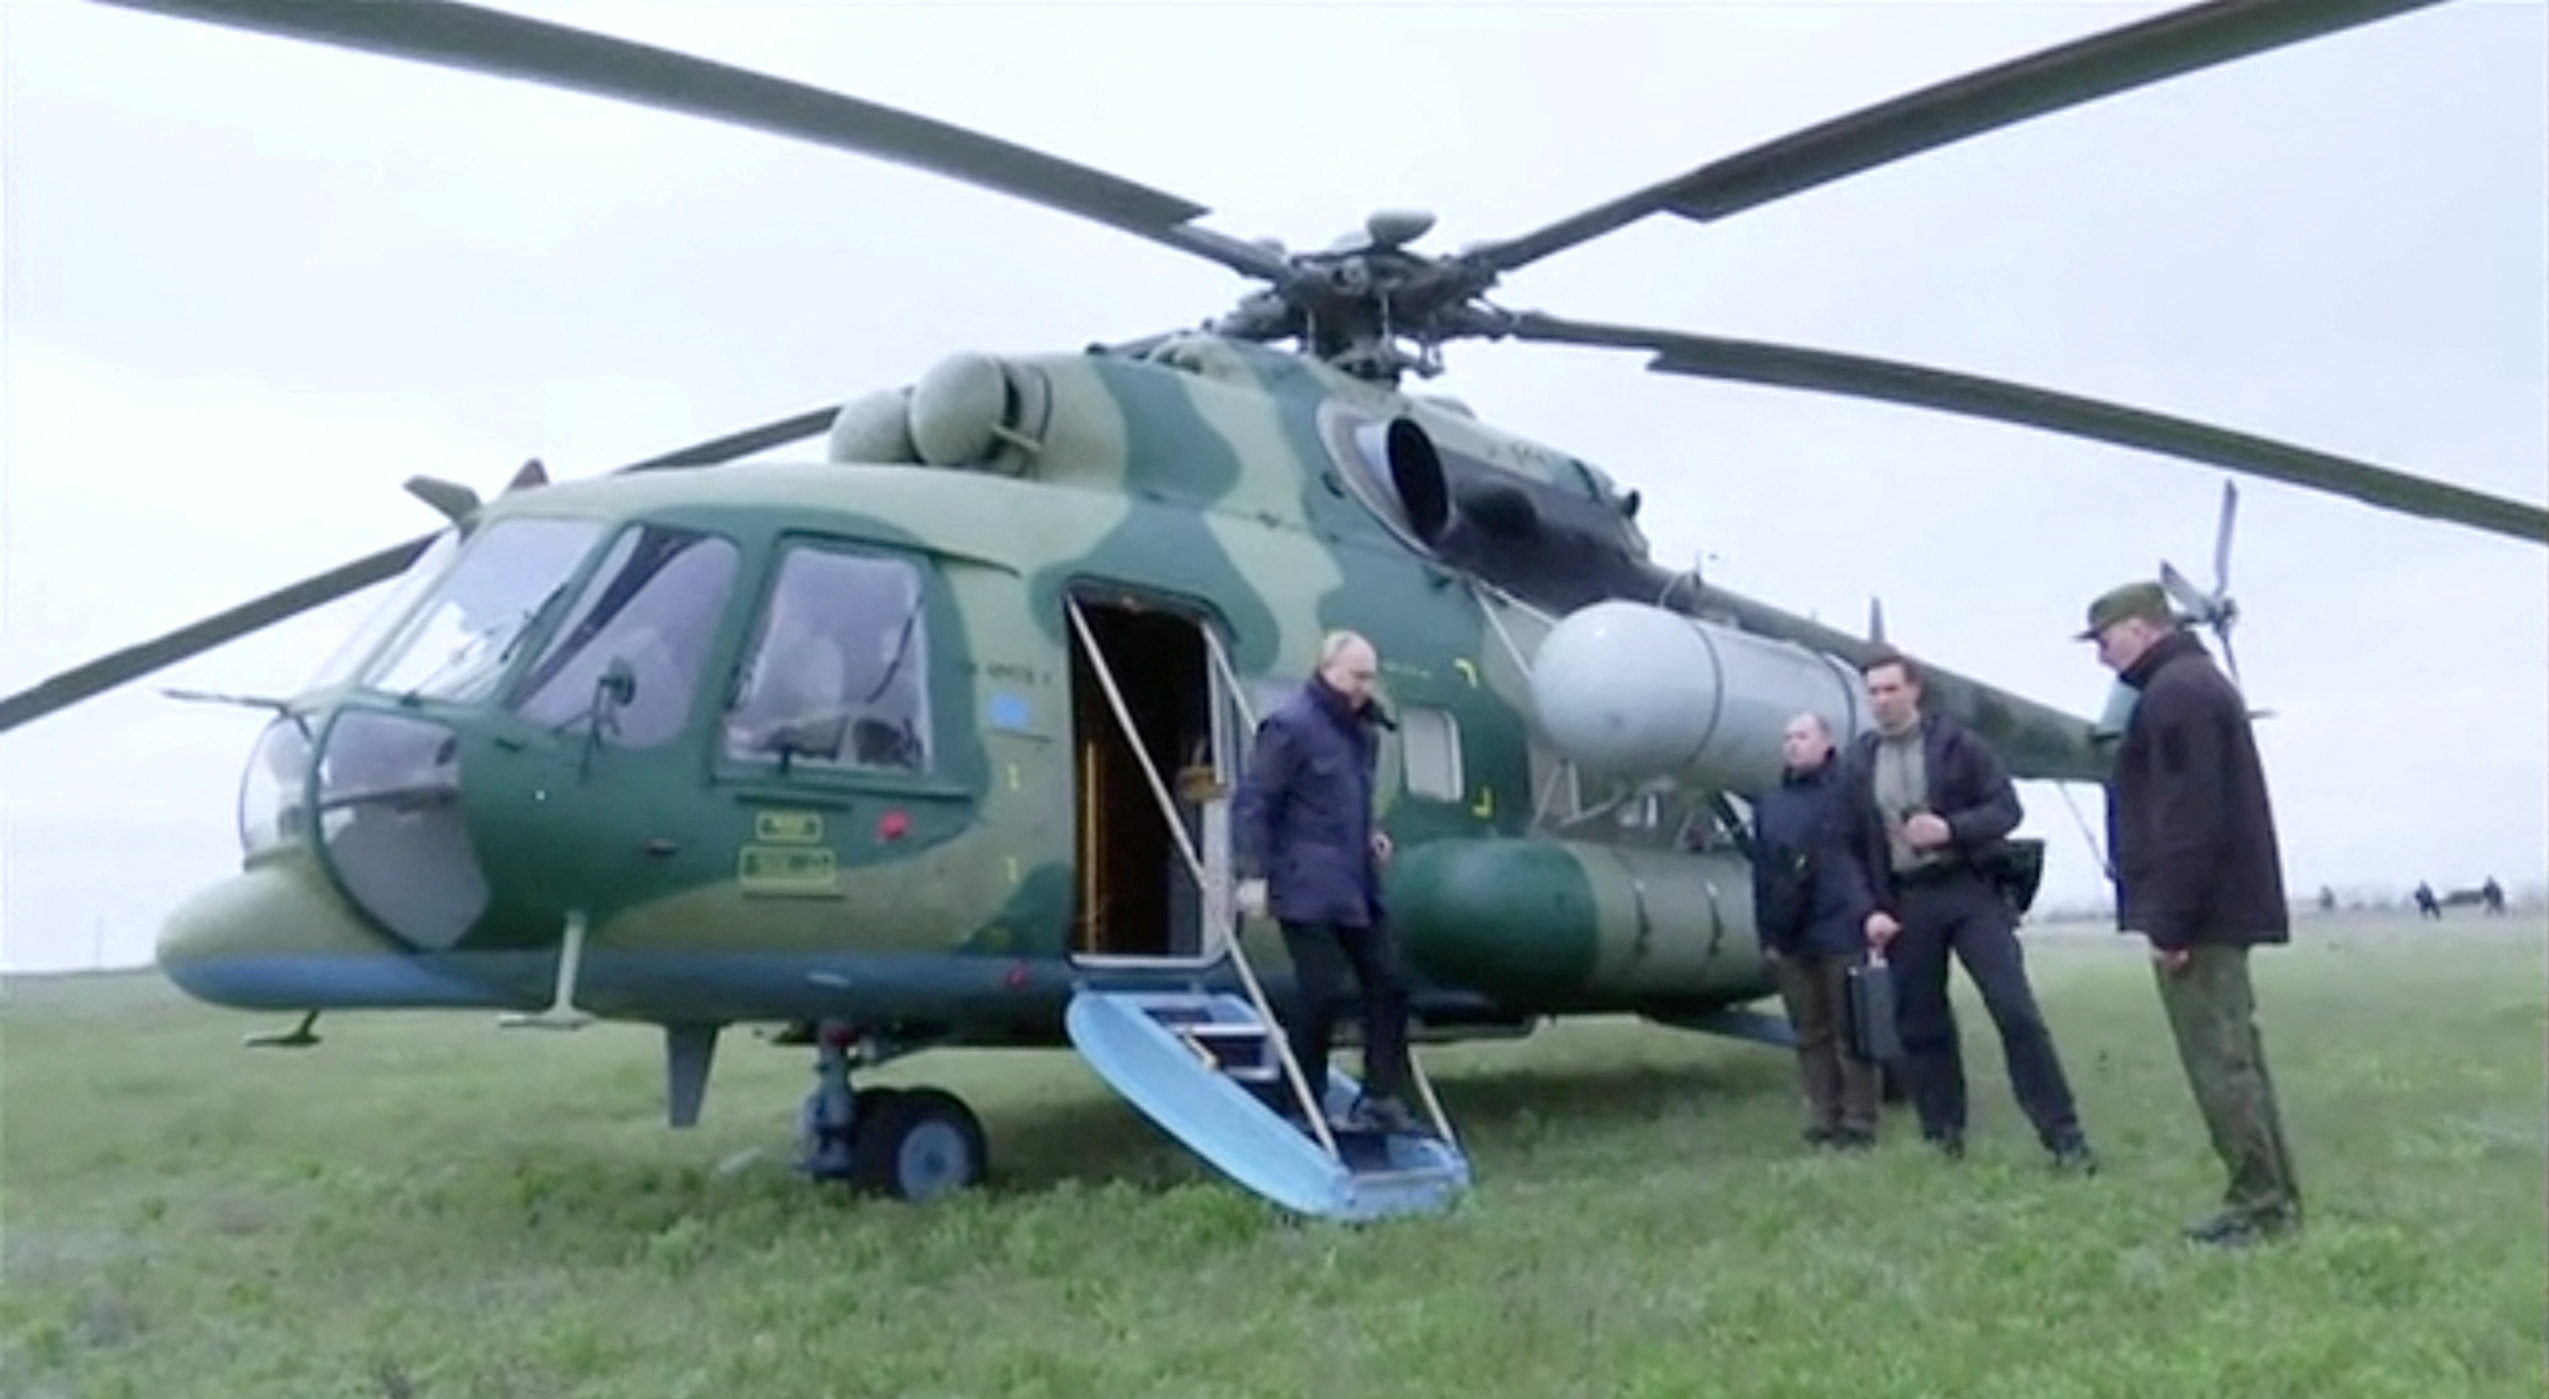 Russian President Vladimir Putin disembarks a helicopter as he visits the headquarters of the "Dnieper" army group in the Kherson Region, Ukraine, in this still image taken from handout video released on April 18, 2023. 